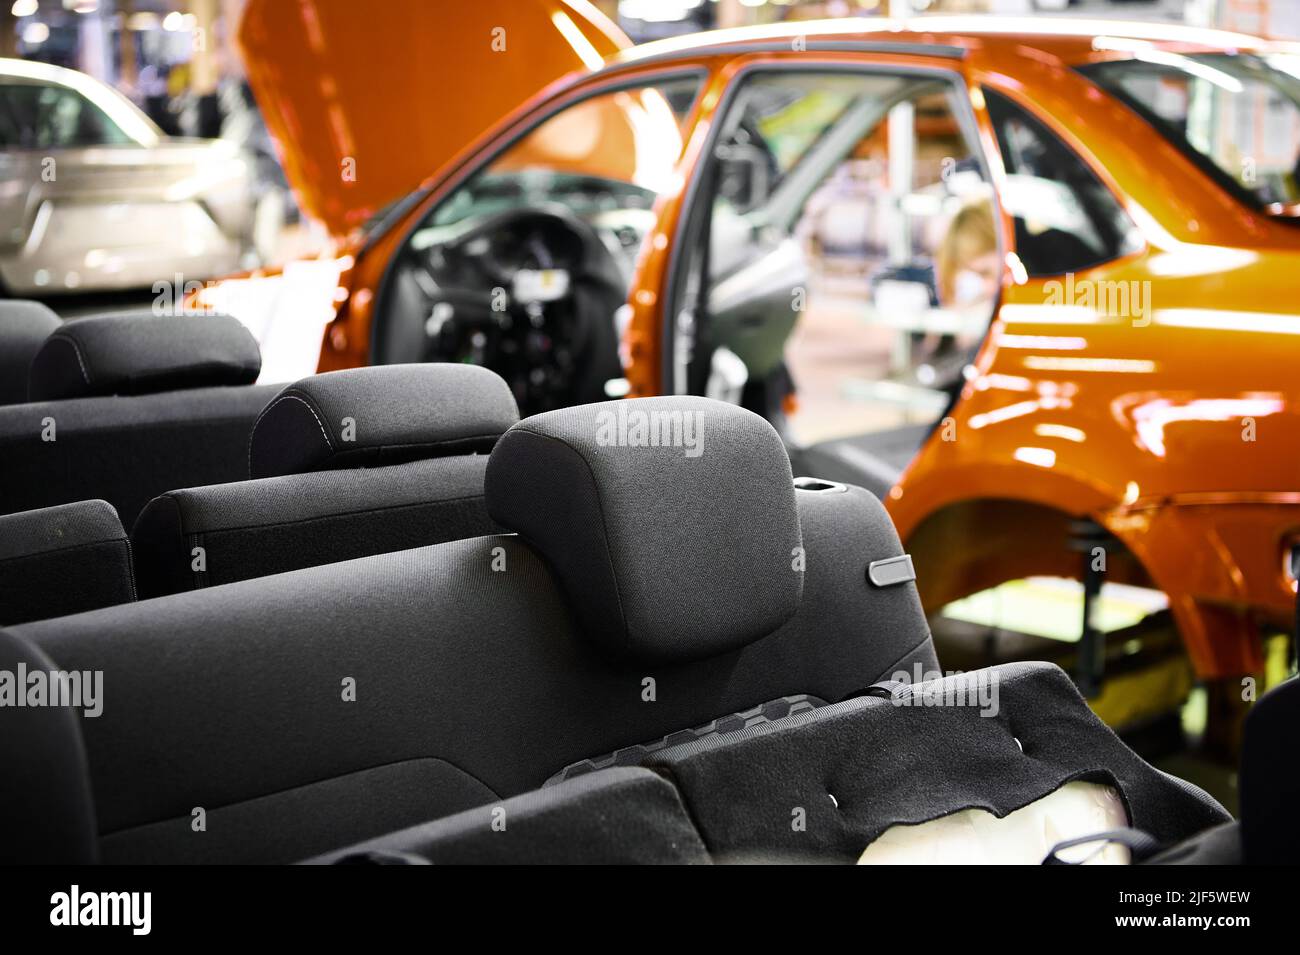 View from the cab of the car on the assembly line of the car factory. Stock Photo